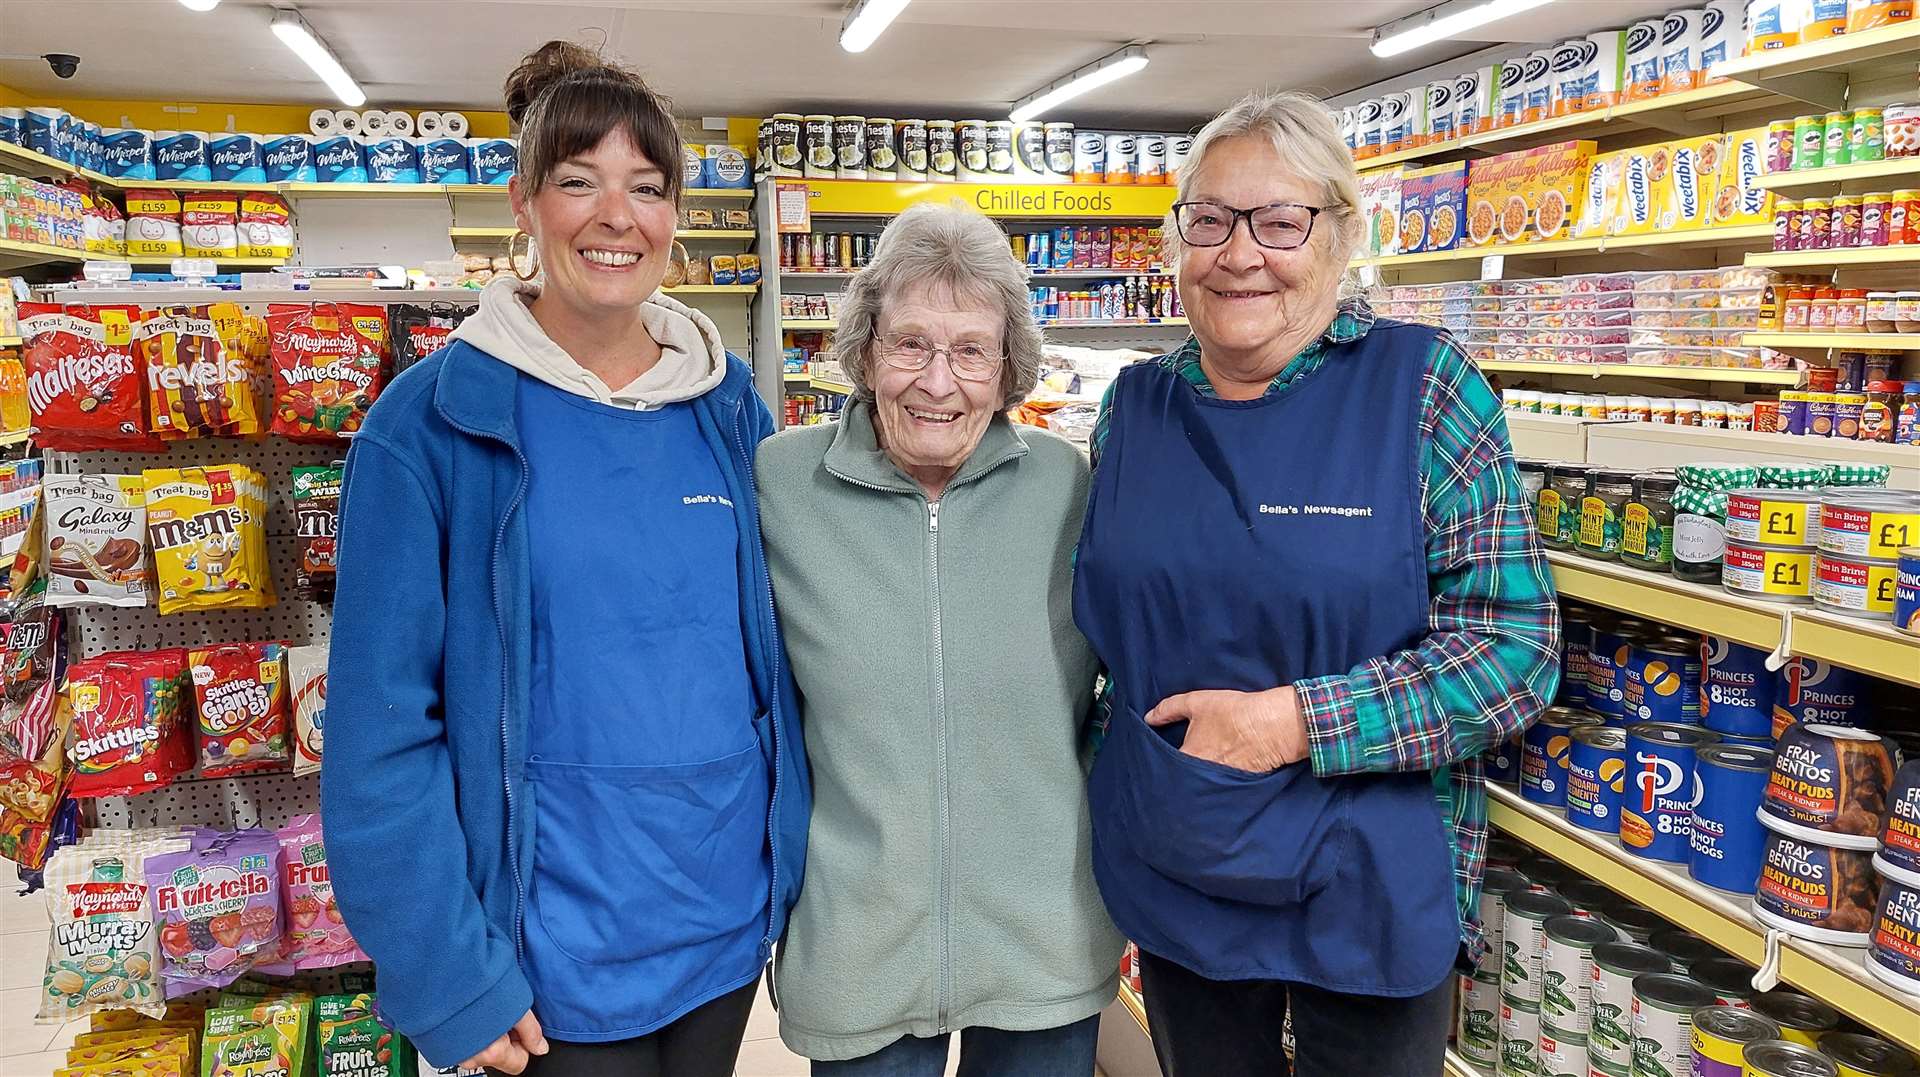 Employees Justina Stevens and Bev Duncan with 87-year-old Daphne Stevens who worked at the newsagents for 50 years